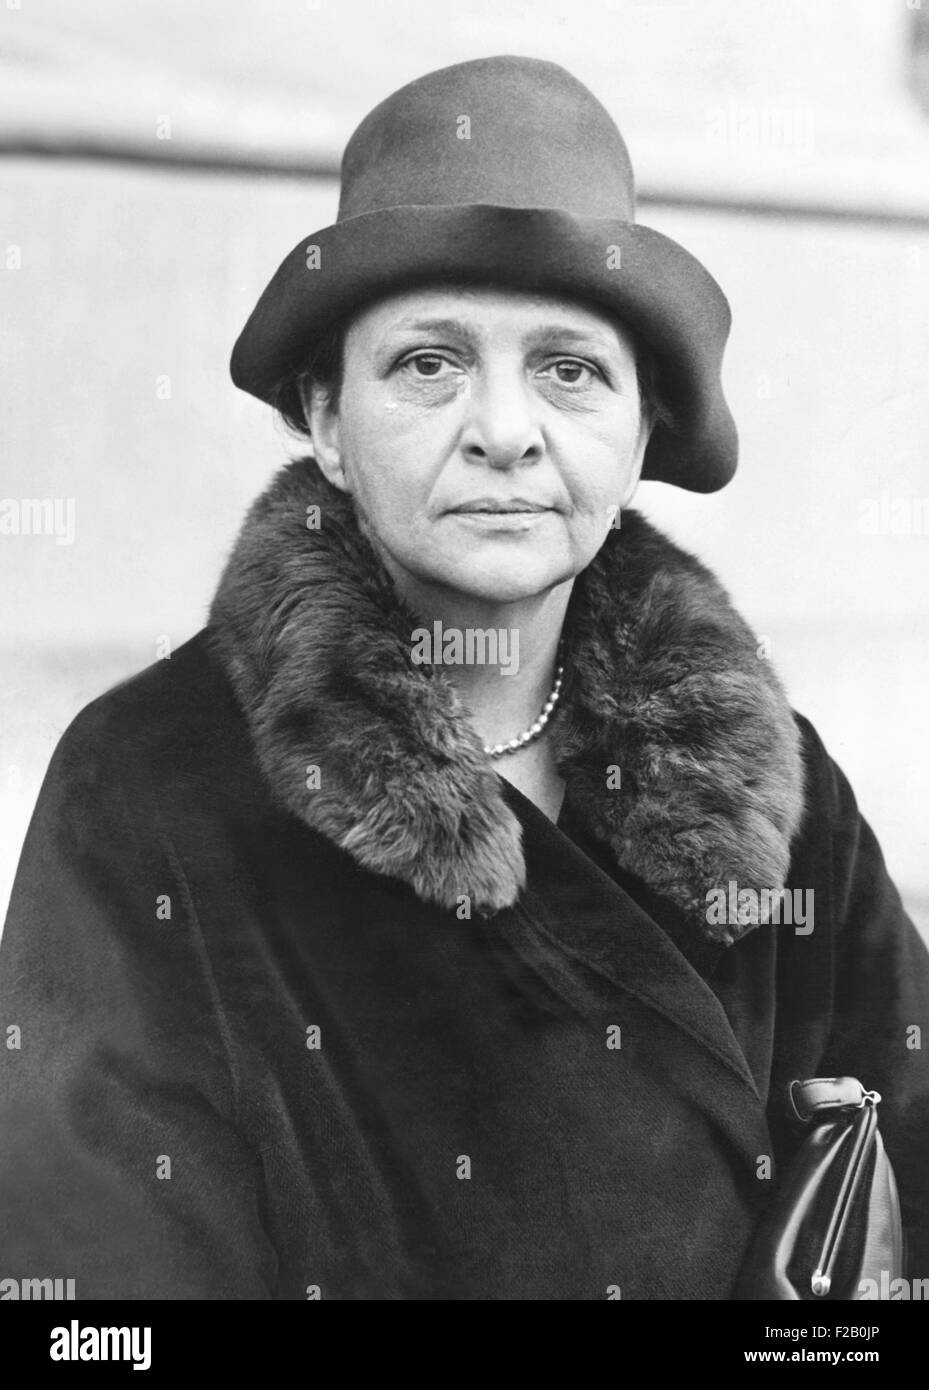 Frances Perkins was Industrial Commissioner of New York State. On March 25, 1930 she testified about unemployment in New York State to the Senate Commerce Committee, Washington DC. (CSU 2015 9 1070) Stock Photo